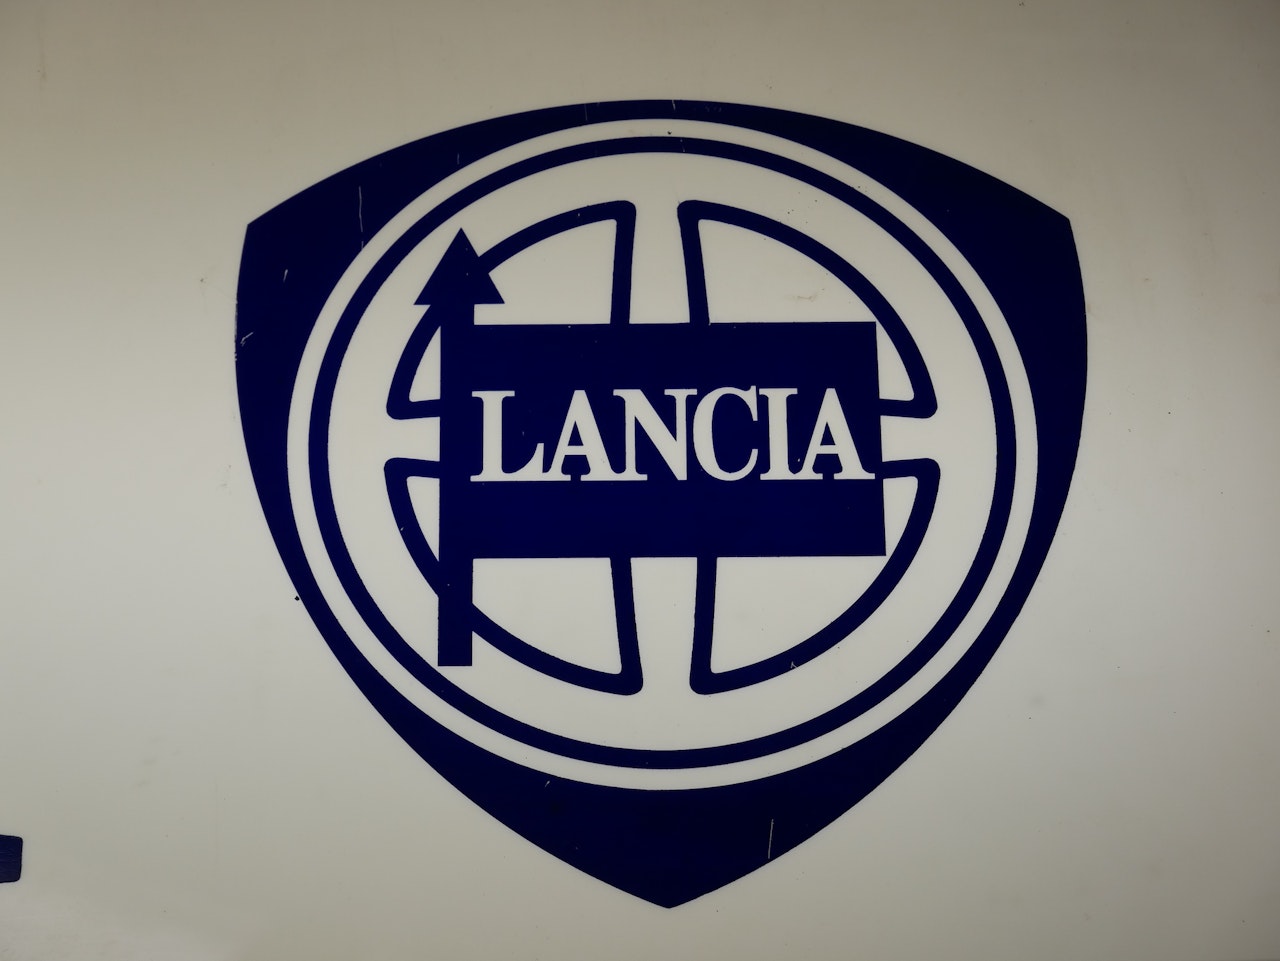 LANCIA ILLUMINATED SIGN for sale by auction in Hove, East Sussex, United  Kingdom